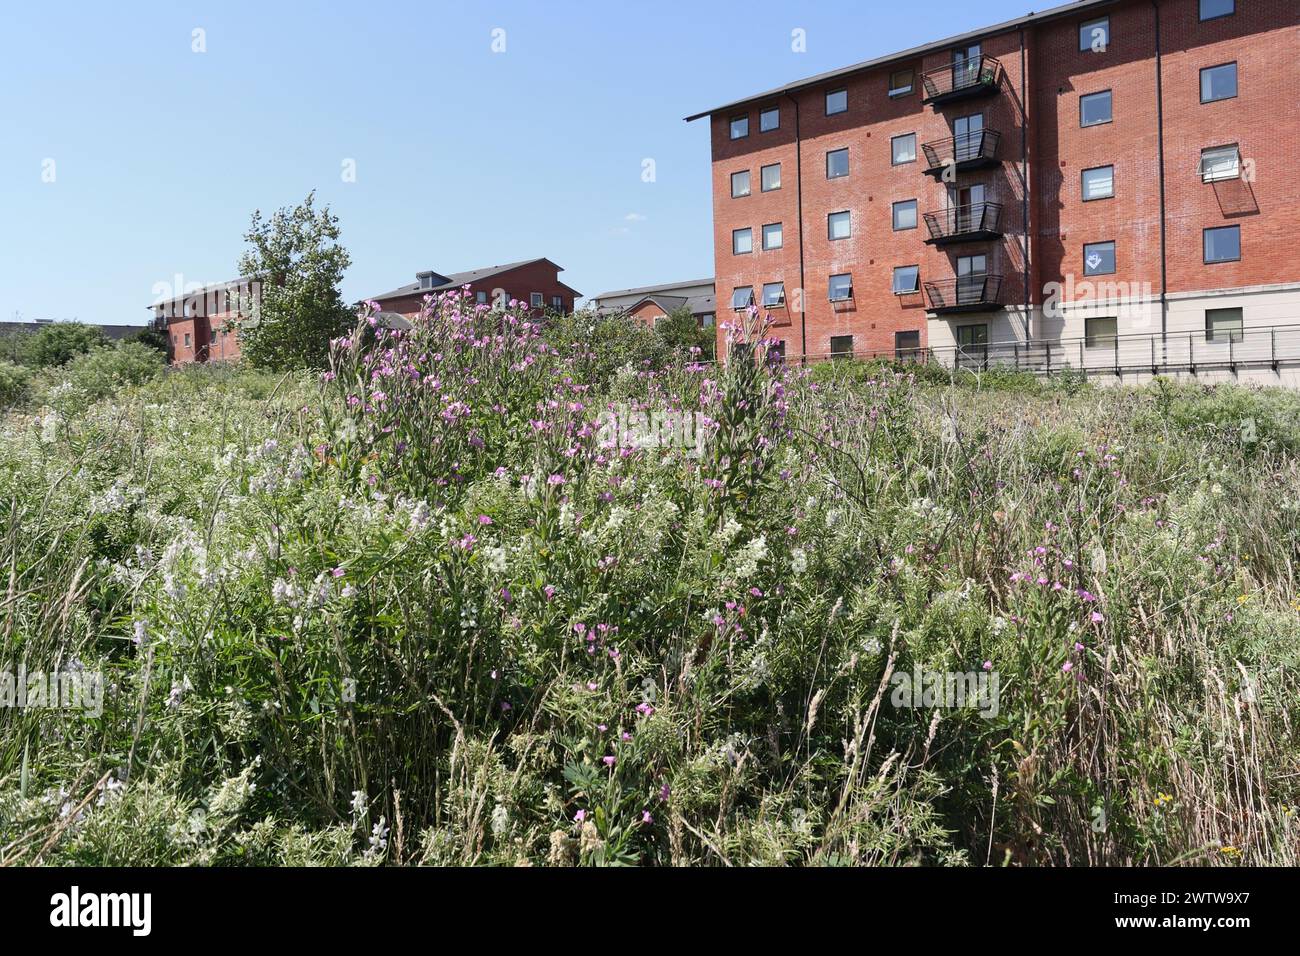 Former waste ground in Cardiff Bay Atlantic wharf area Wales UK, now built upon and biodiversity lost to development wildflowers weeds Stock Photo